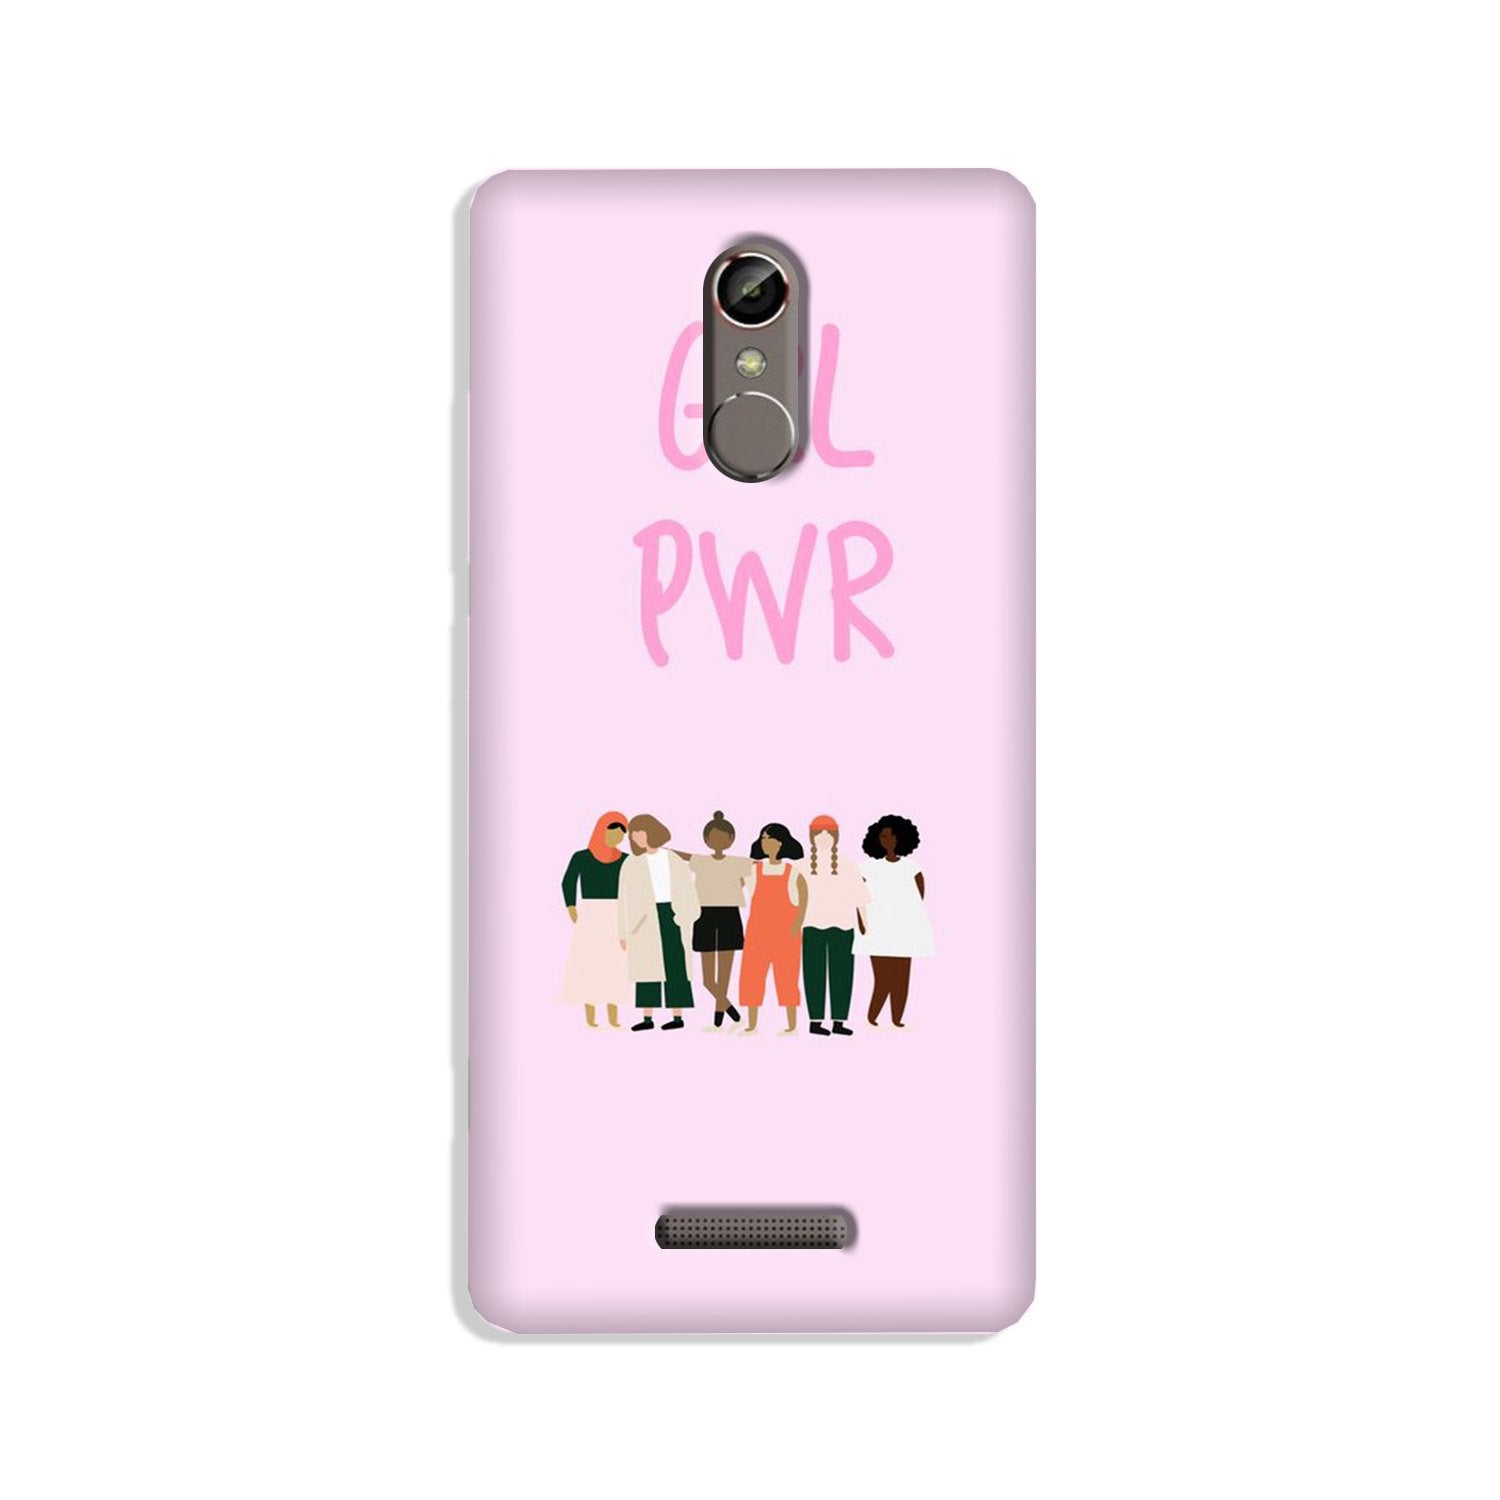 Girl Power Case for Gionee S6s (Design No. 267)